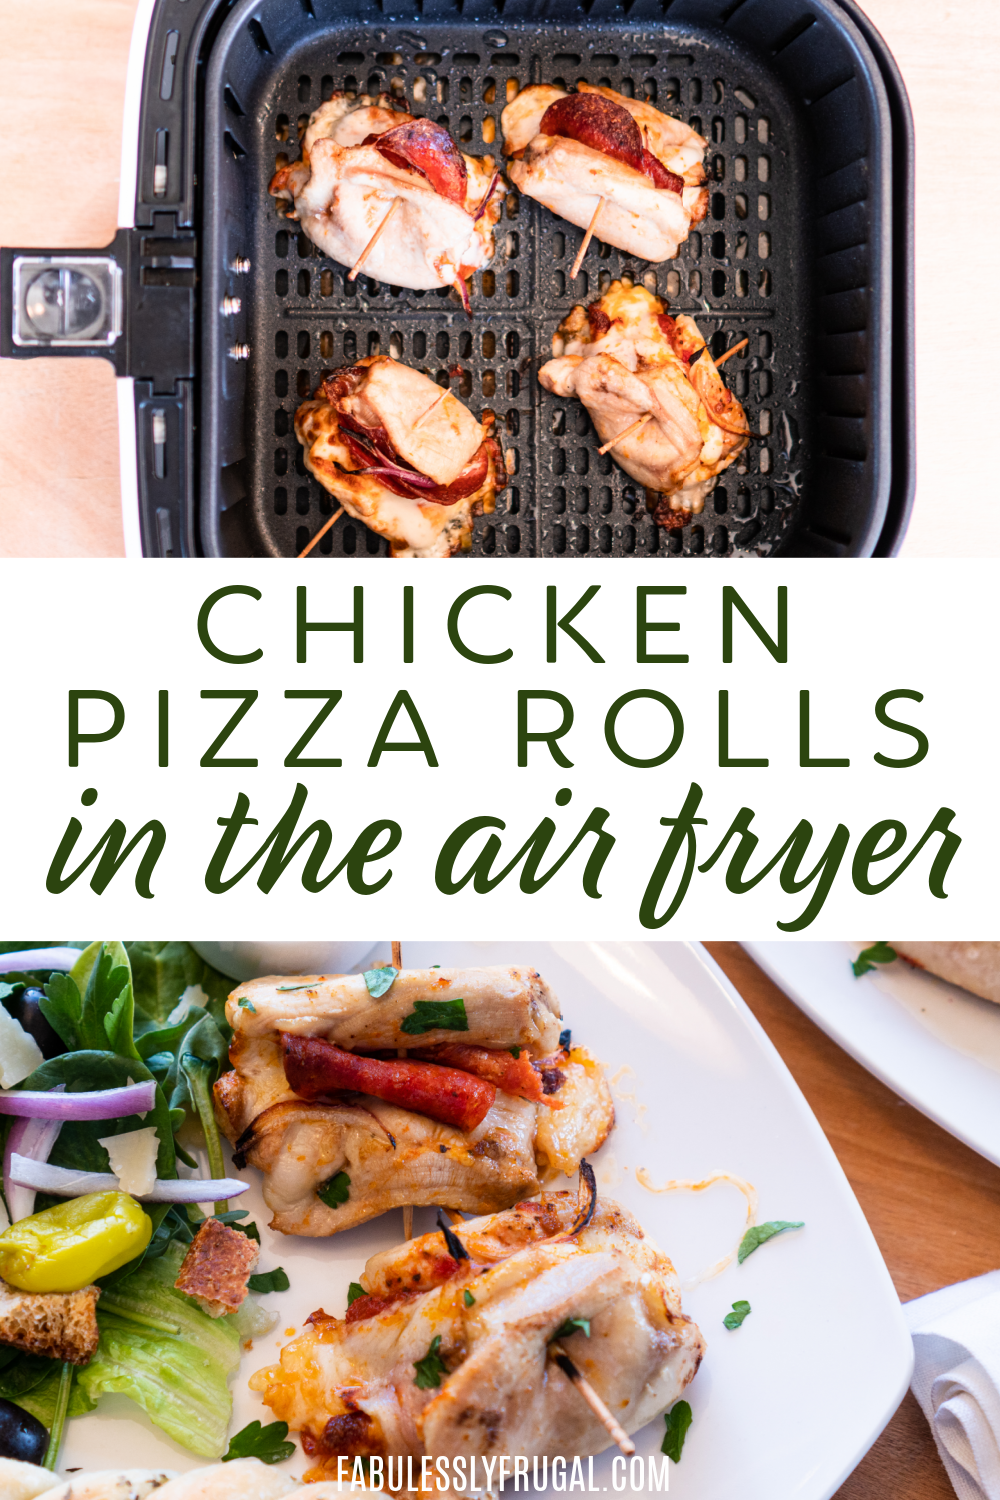 Fall in love with these amazing chicken pizza rolls in the air fryer. It is a quick-and-easy air fryer recipe that everyone will love!